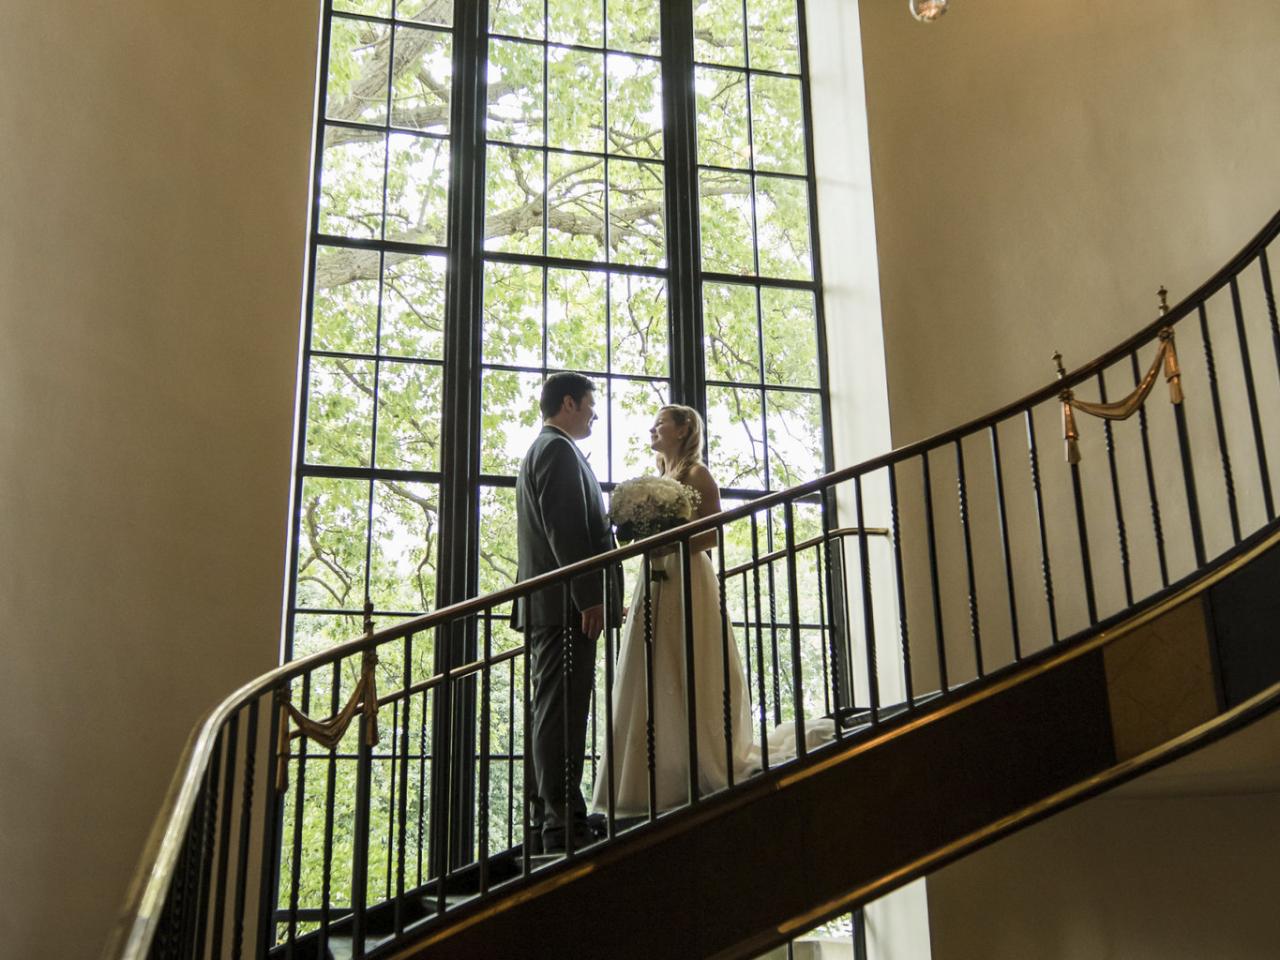 Couple posed on staircase beneath chandelier during wedding at faculty club